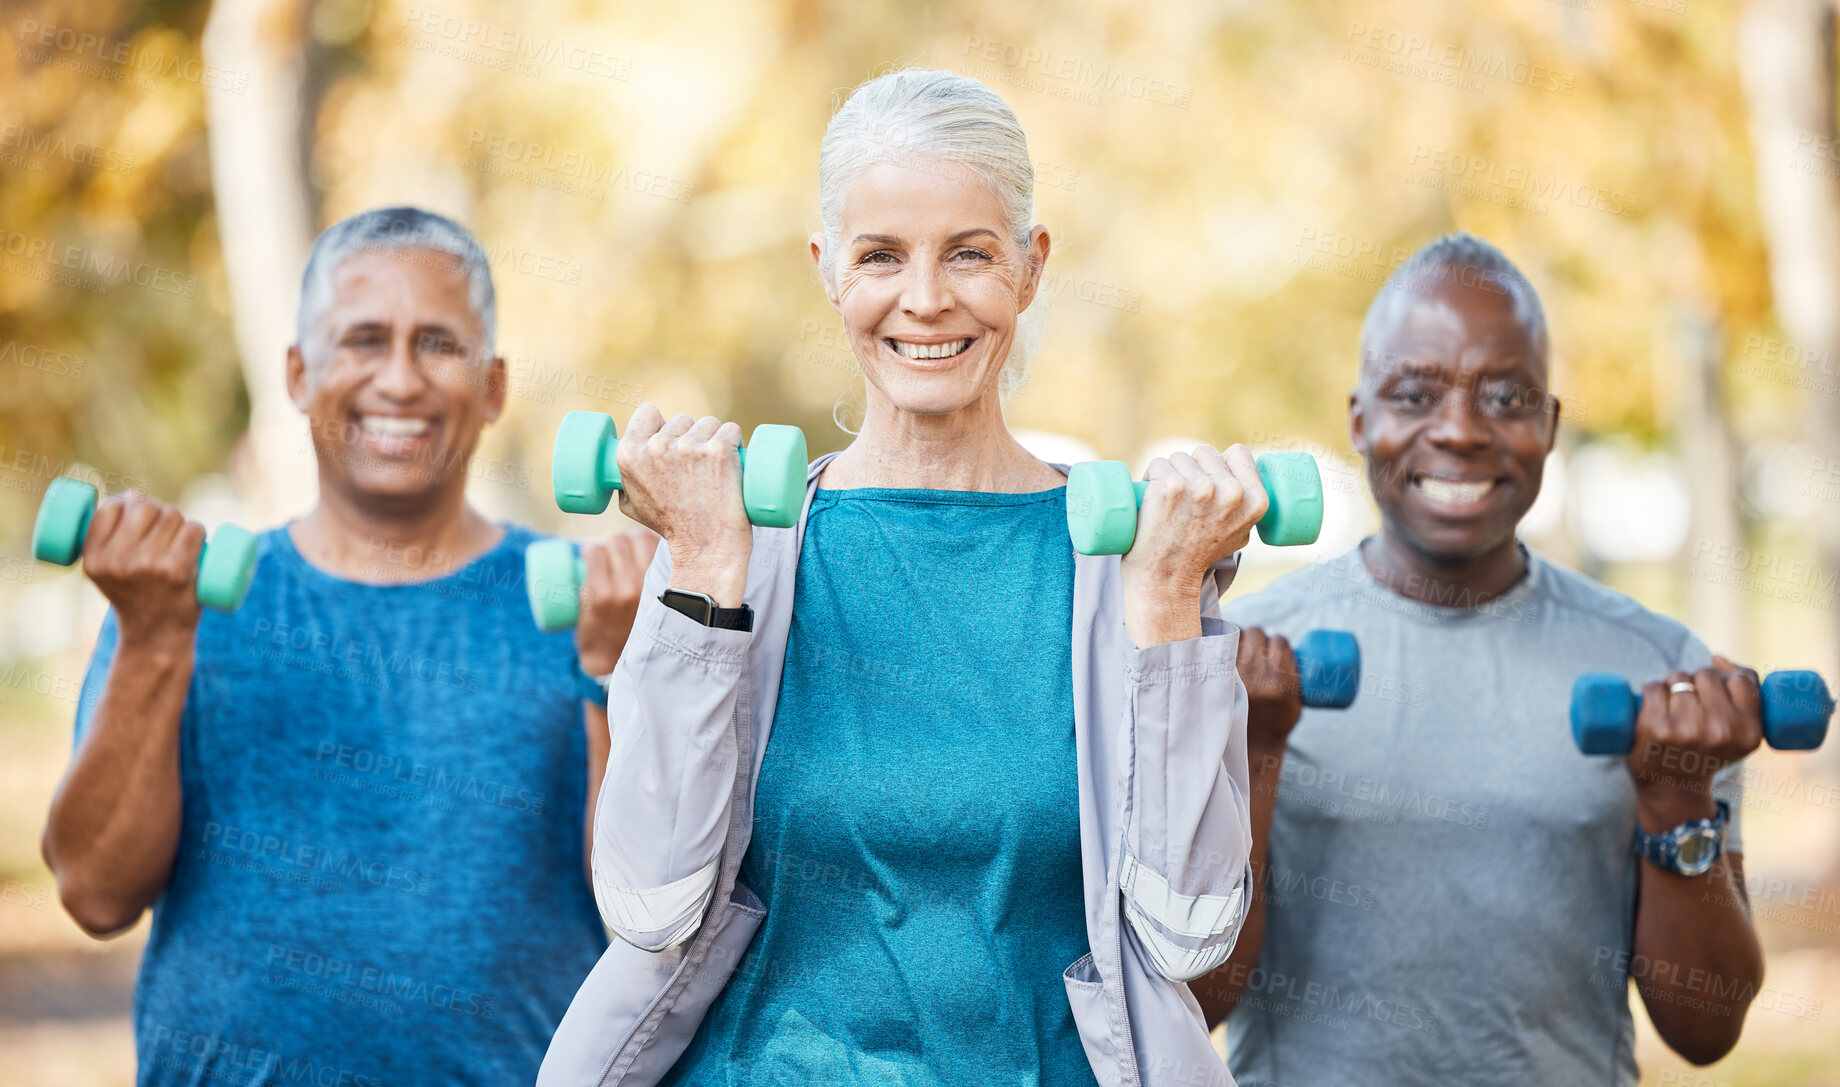 Buy stock photo Weights, fitness and portrait of senior people doing a strength arm exercise in an outdoor park. Sports, wellness and group of elderly friends doing a workout or training class together in nature.